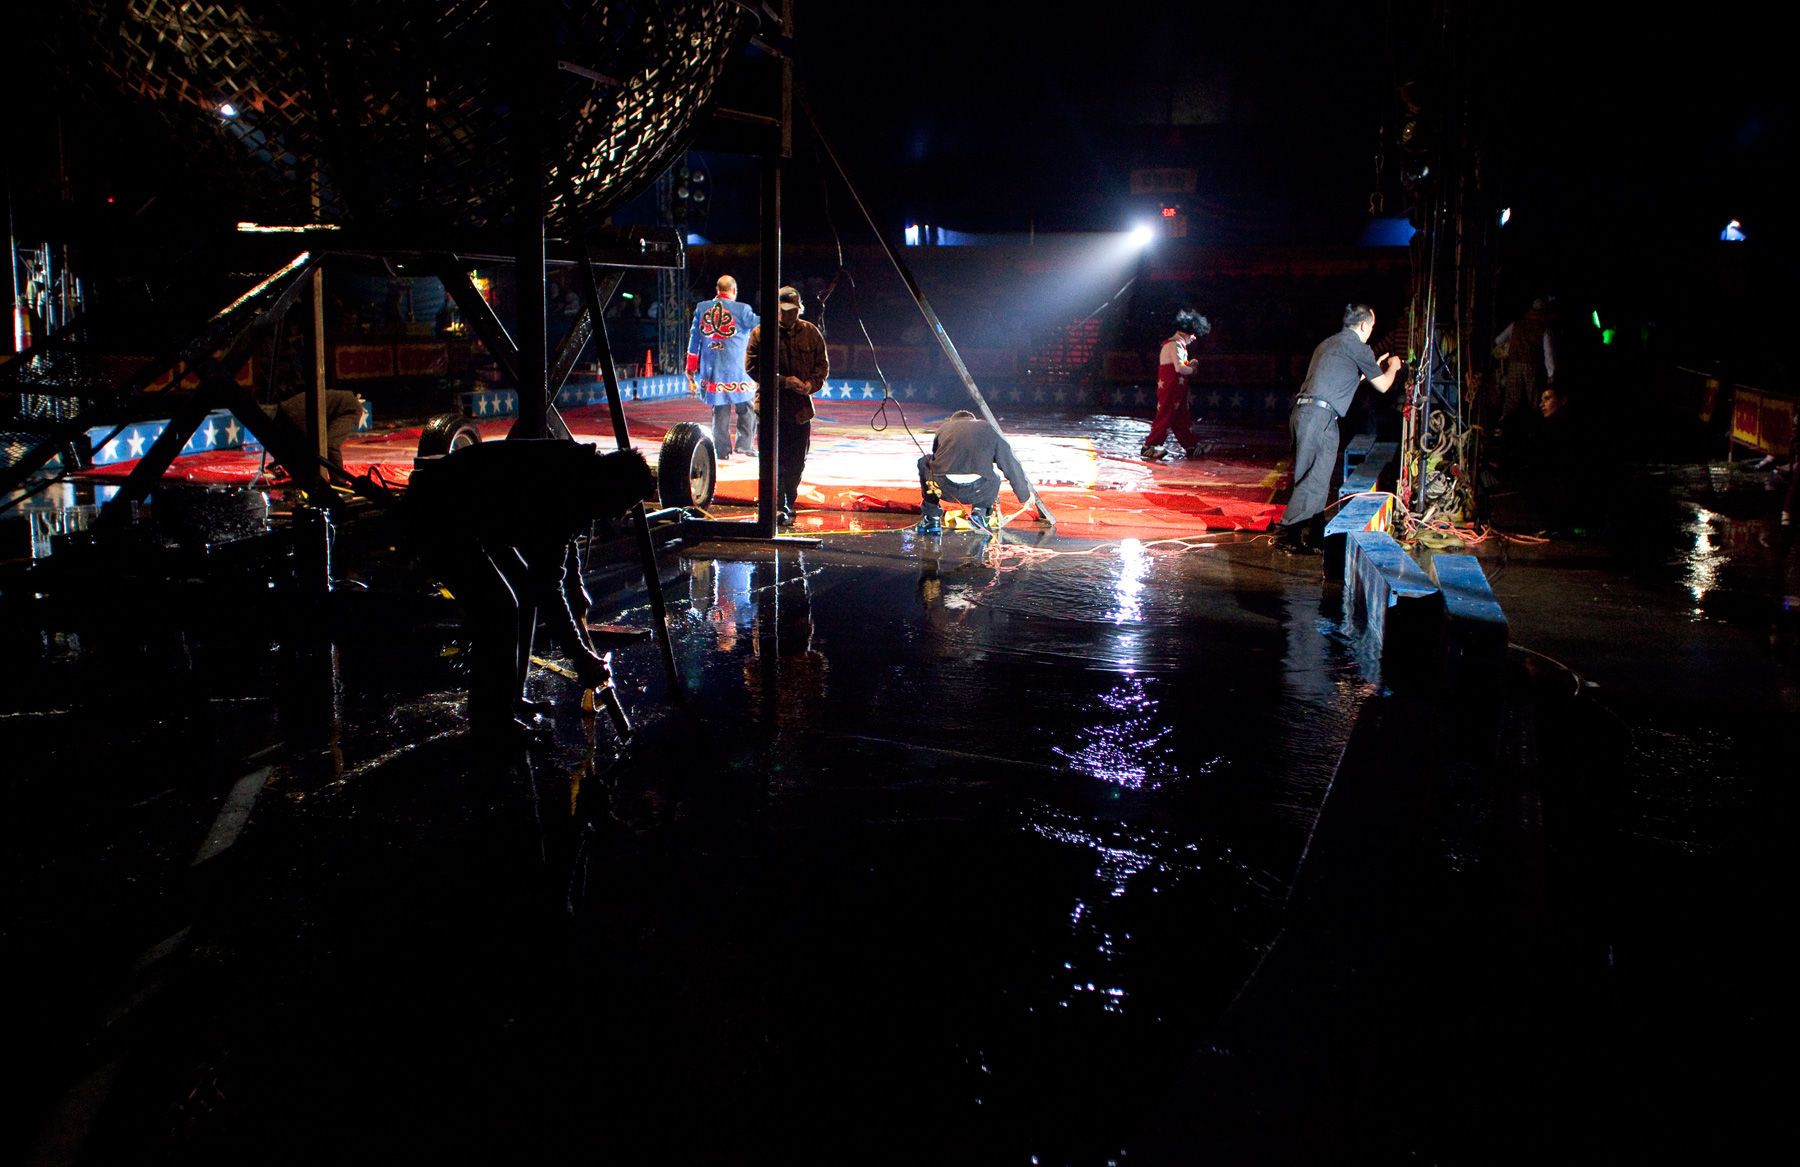 After a sudden rain storm, workers and performers clear water around the big top after a performance of the Cole Brothers Circus of the Stars in Myrtle Beach, South Carolina March 31, 2013. Traveling circuses such as the Cole Brothers Circus of the Stars, complete with it's traveling big top tent, set up their tent city in smaller markets all along the East Coast of the United States as they aim to bring the circus to rural areas. The Cole Brothers Circus, now in its 129th edition, travels to 100 cities in 20-25 states and stages 250 shows a year.   REUTERS/Randall Hill   (UNITED STATES)